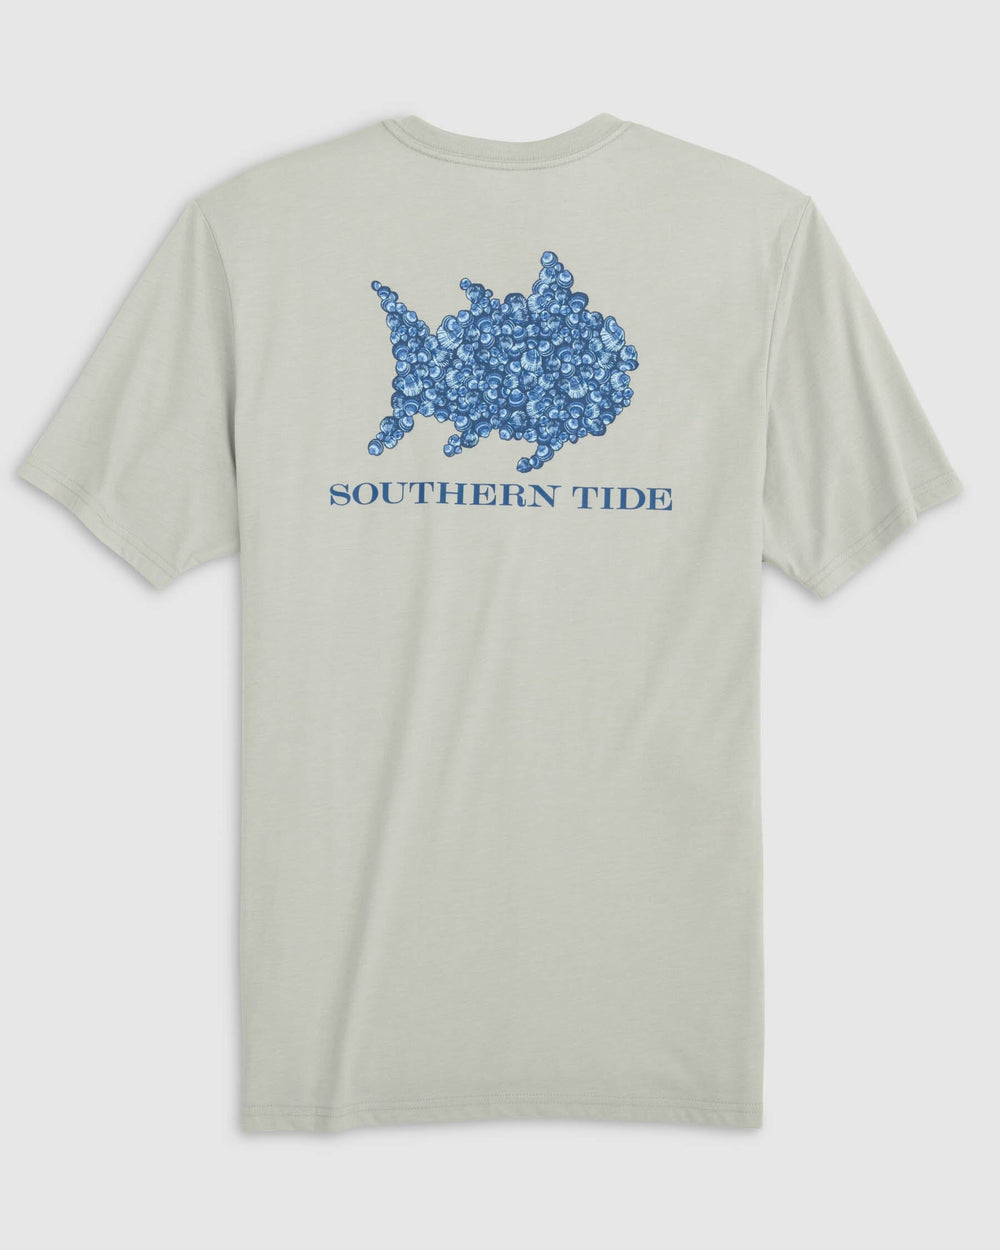 The back view of the Southern Tide Heather Skipack Shell Fill T-Shirt by Southern Tide - Heather Slate Grey